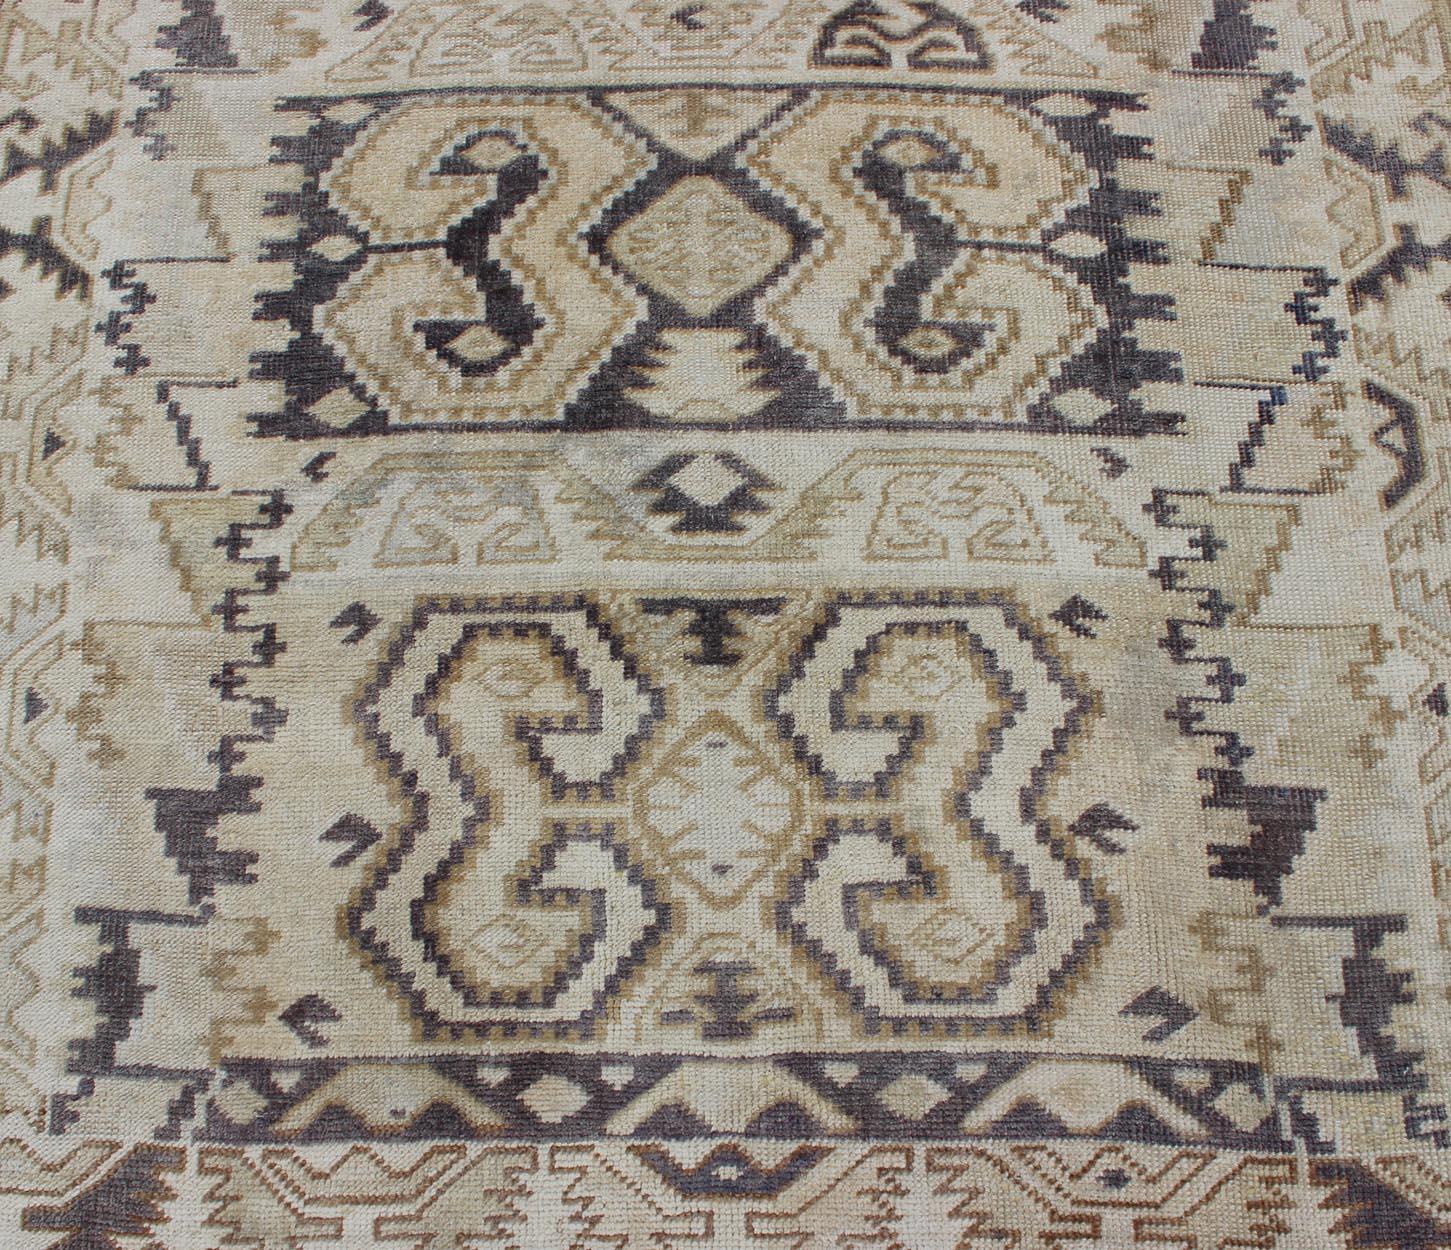 Mid-20th Century Uniquely Designed Oushak Rug in Taupe and Purple-Gray